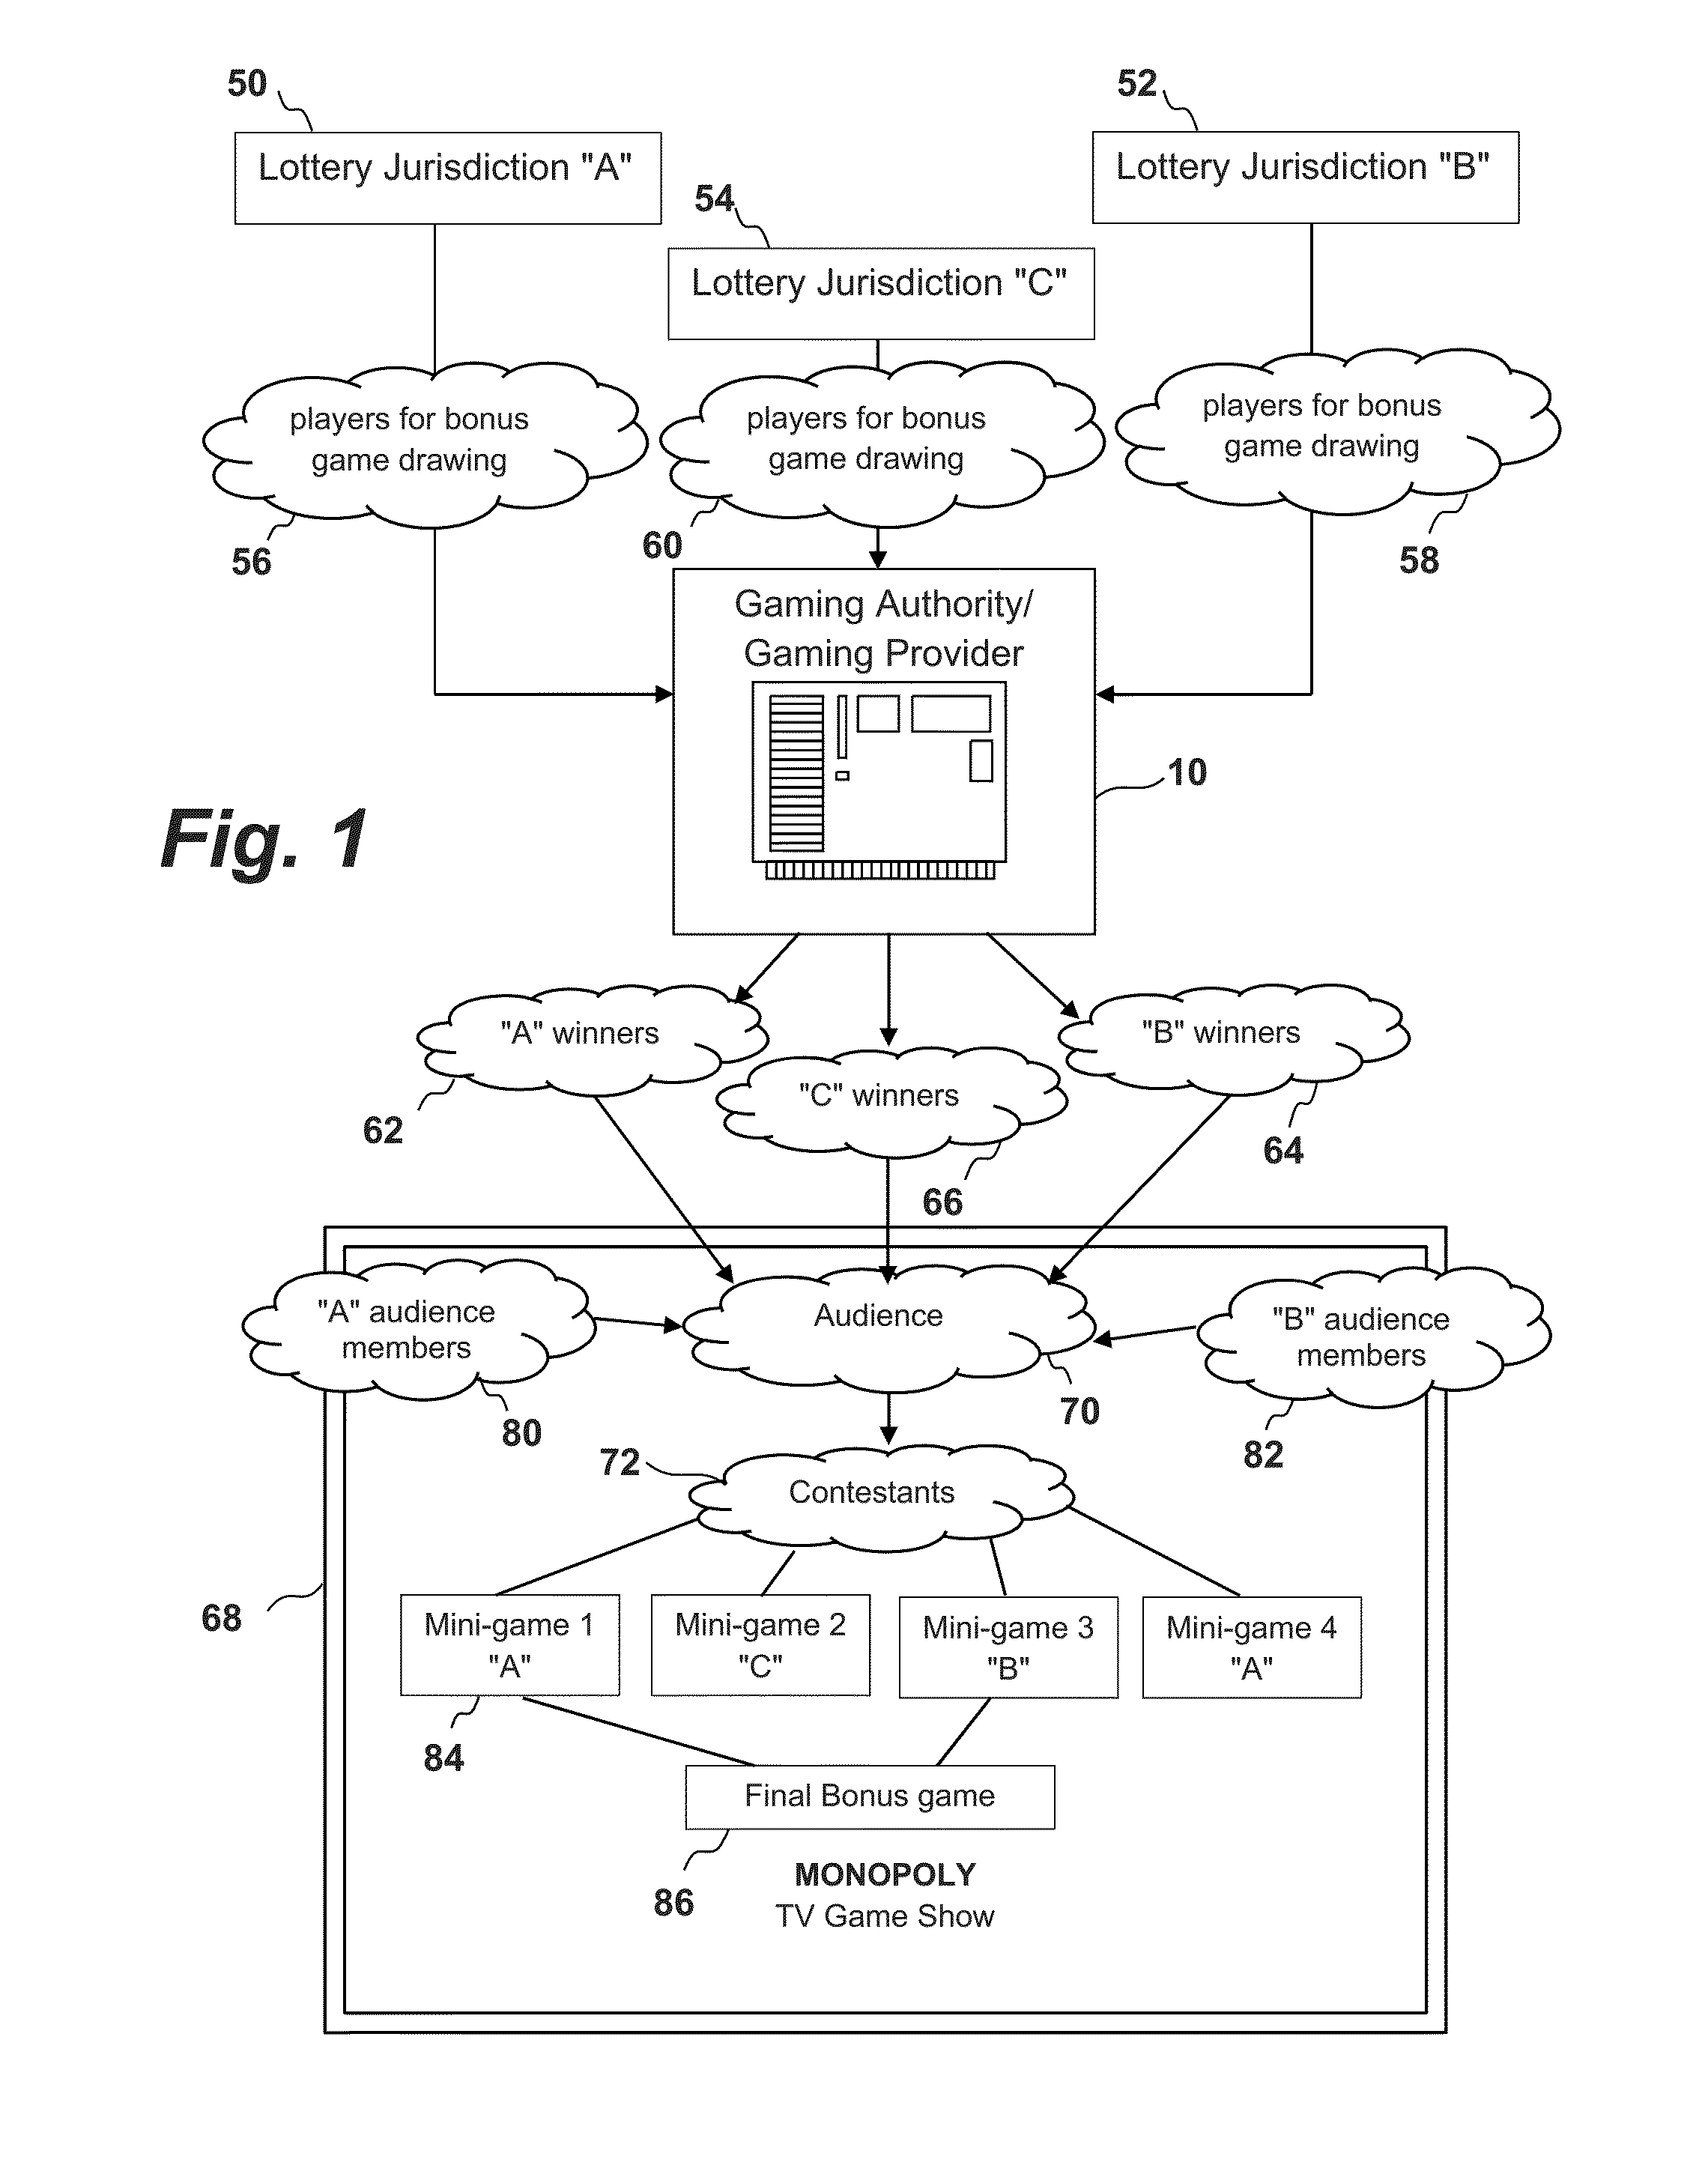 Method and System for Conducting and Linking a Televised Game Show with Play of a Lottery Game